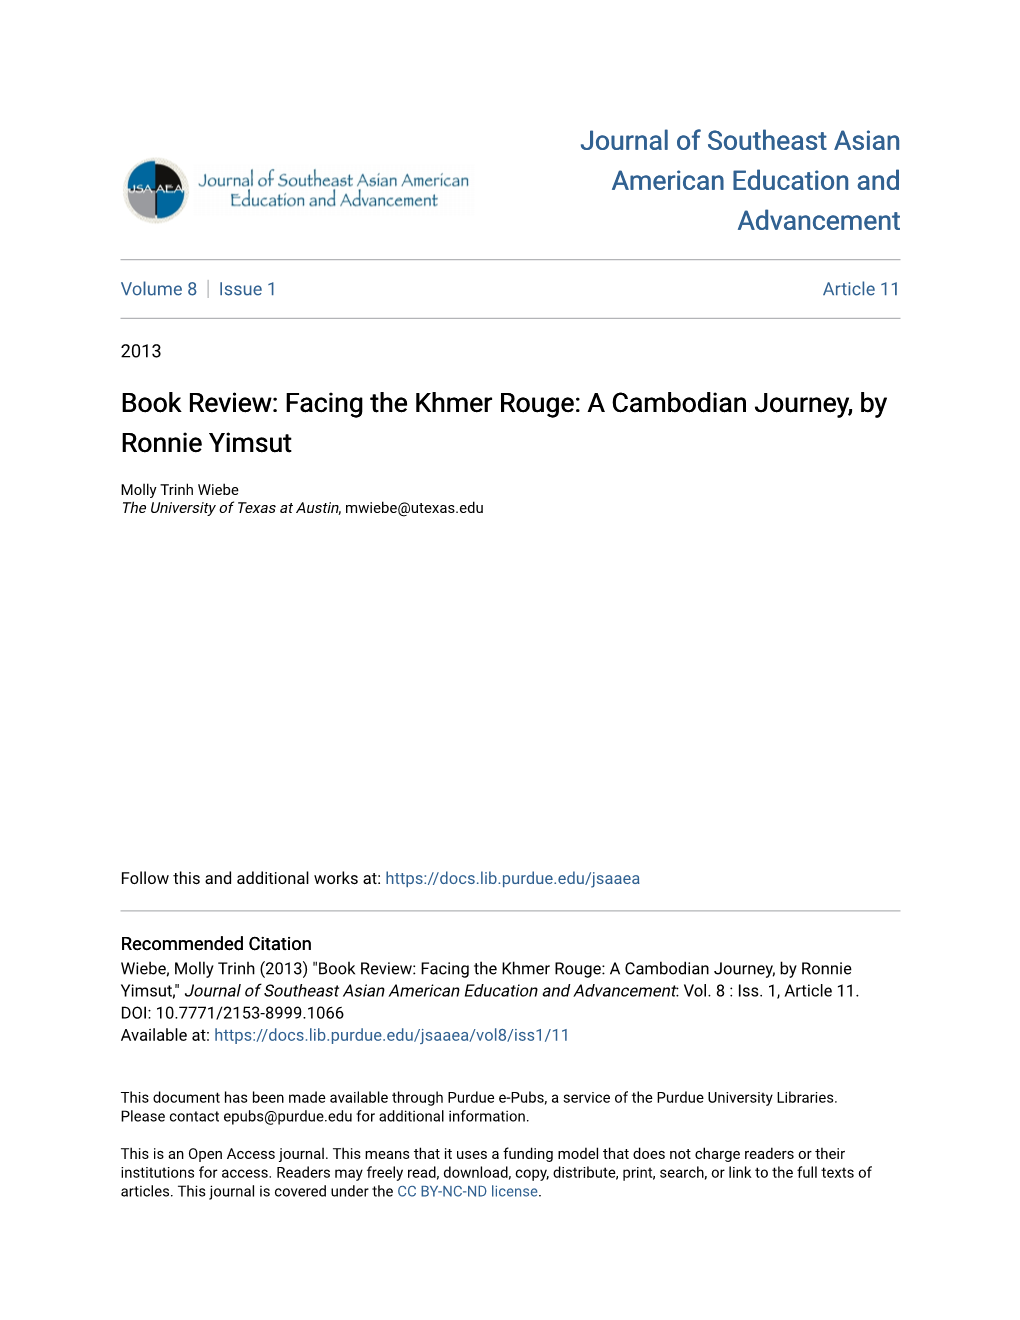 Book Review: Facing the Khmer Rouge: a Cambodian Journey, by Ronnie Yimsut